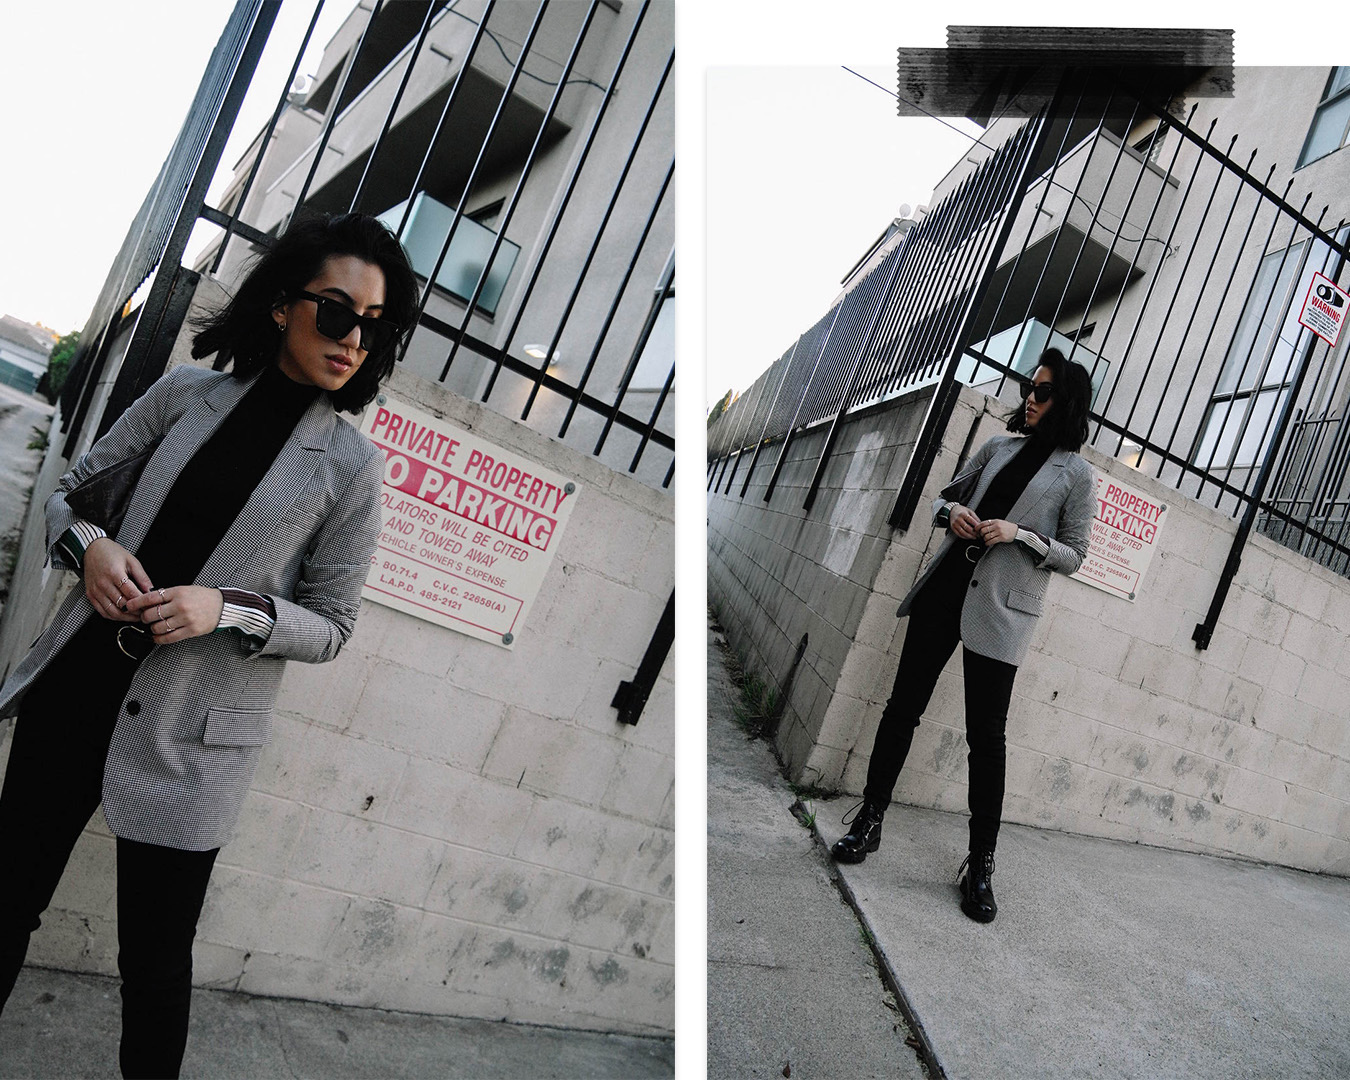 LA Blogger Tania Sarin wearing a calssic blazer and black sunnies in this editorial street style look